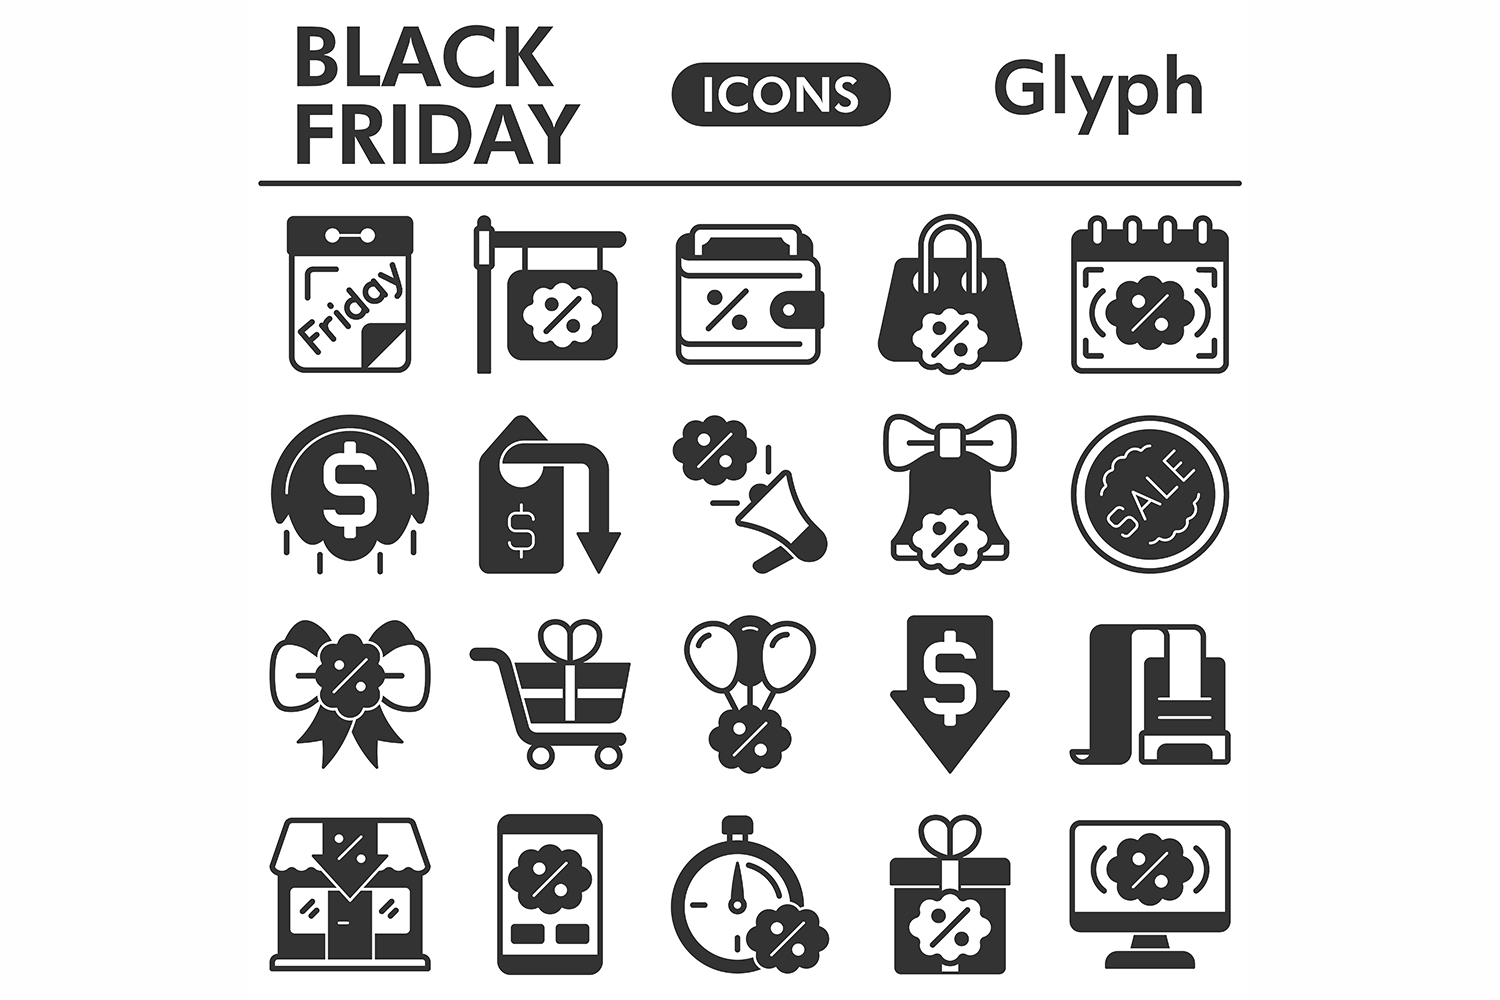 Black friday icons set, glyph style pinterest preview image.